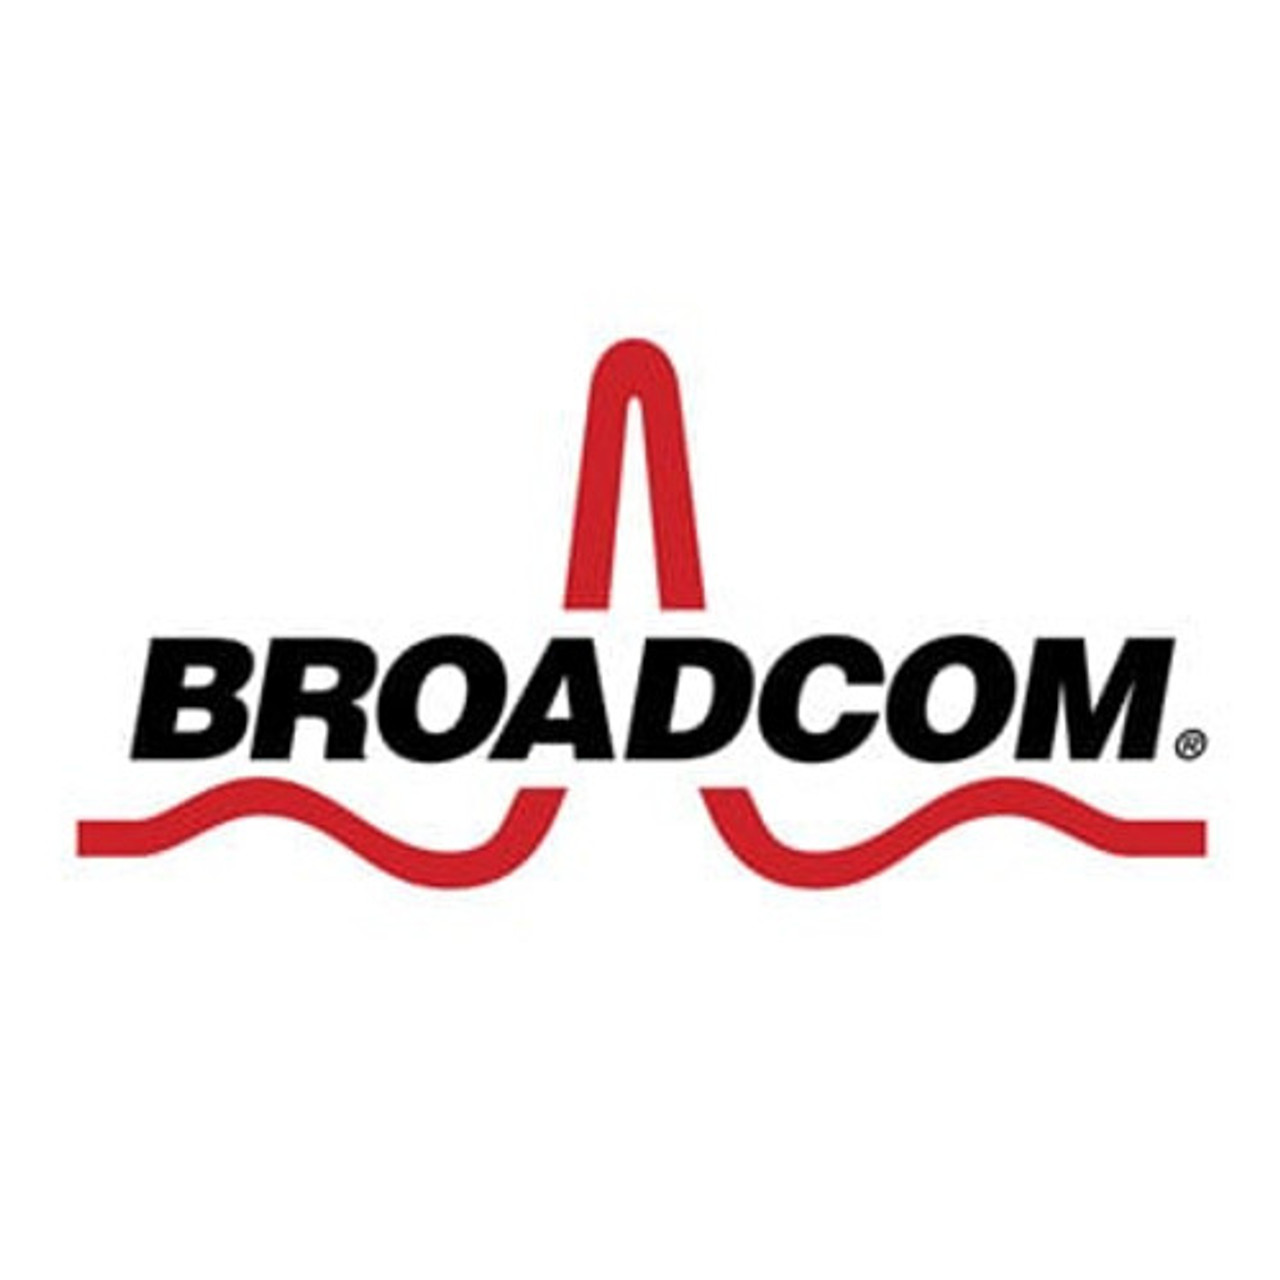 Broadcom 2.0 Commercial BCIS Advanced Web Security with Risk Controls and Web Applications for SWG, Subscription, 250,000-499,999 Users, 1 Year